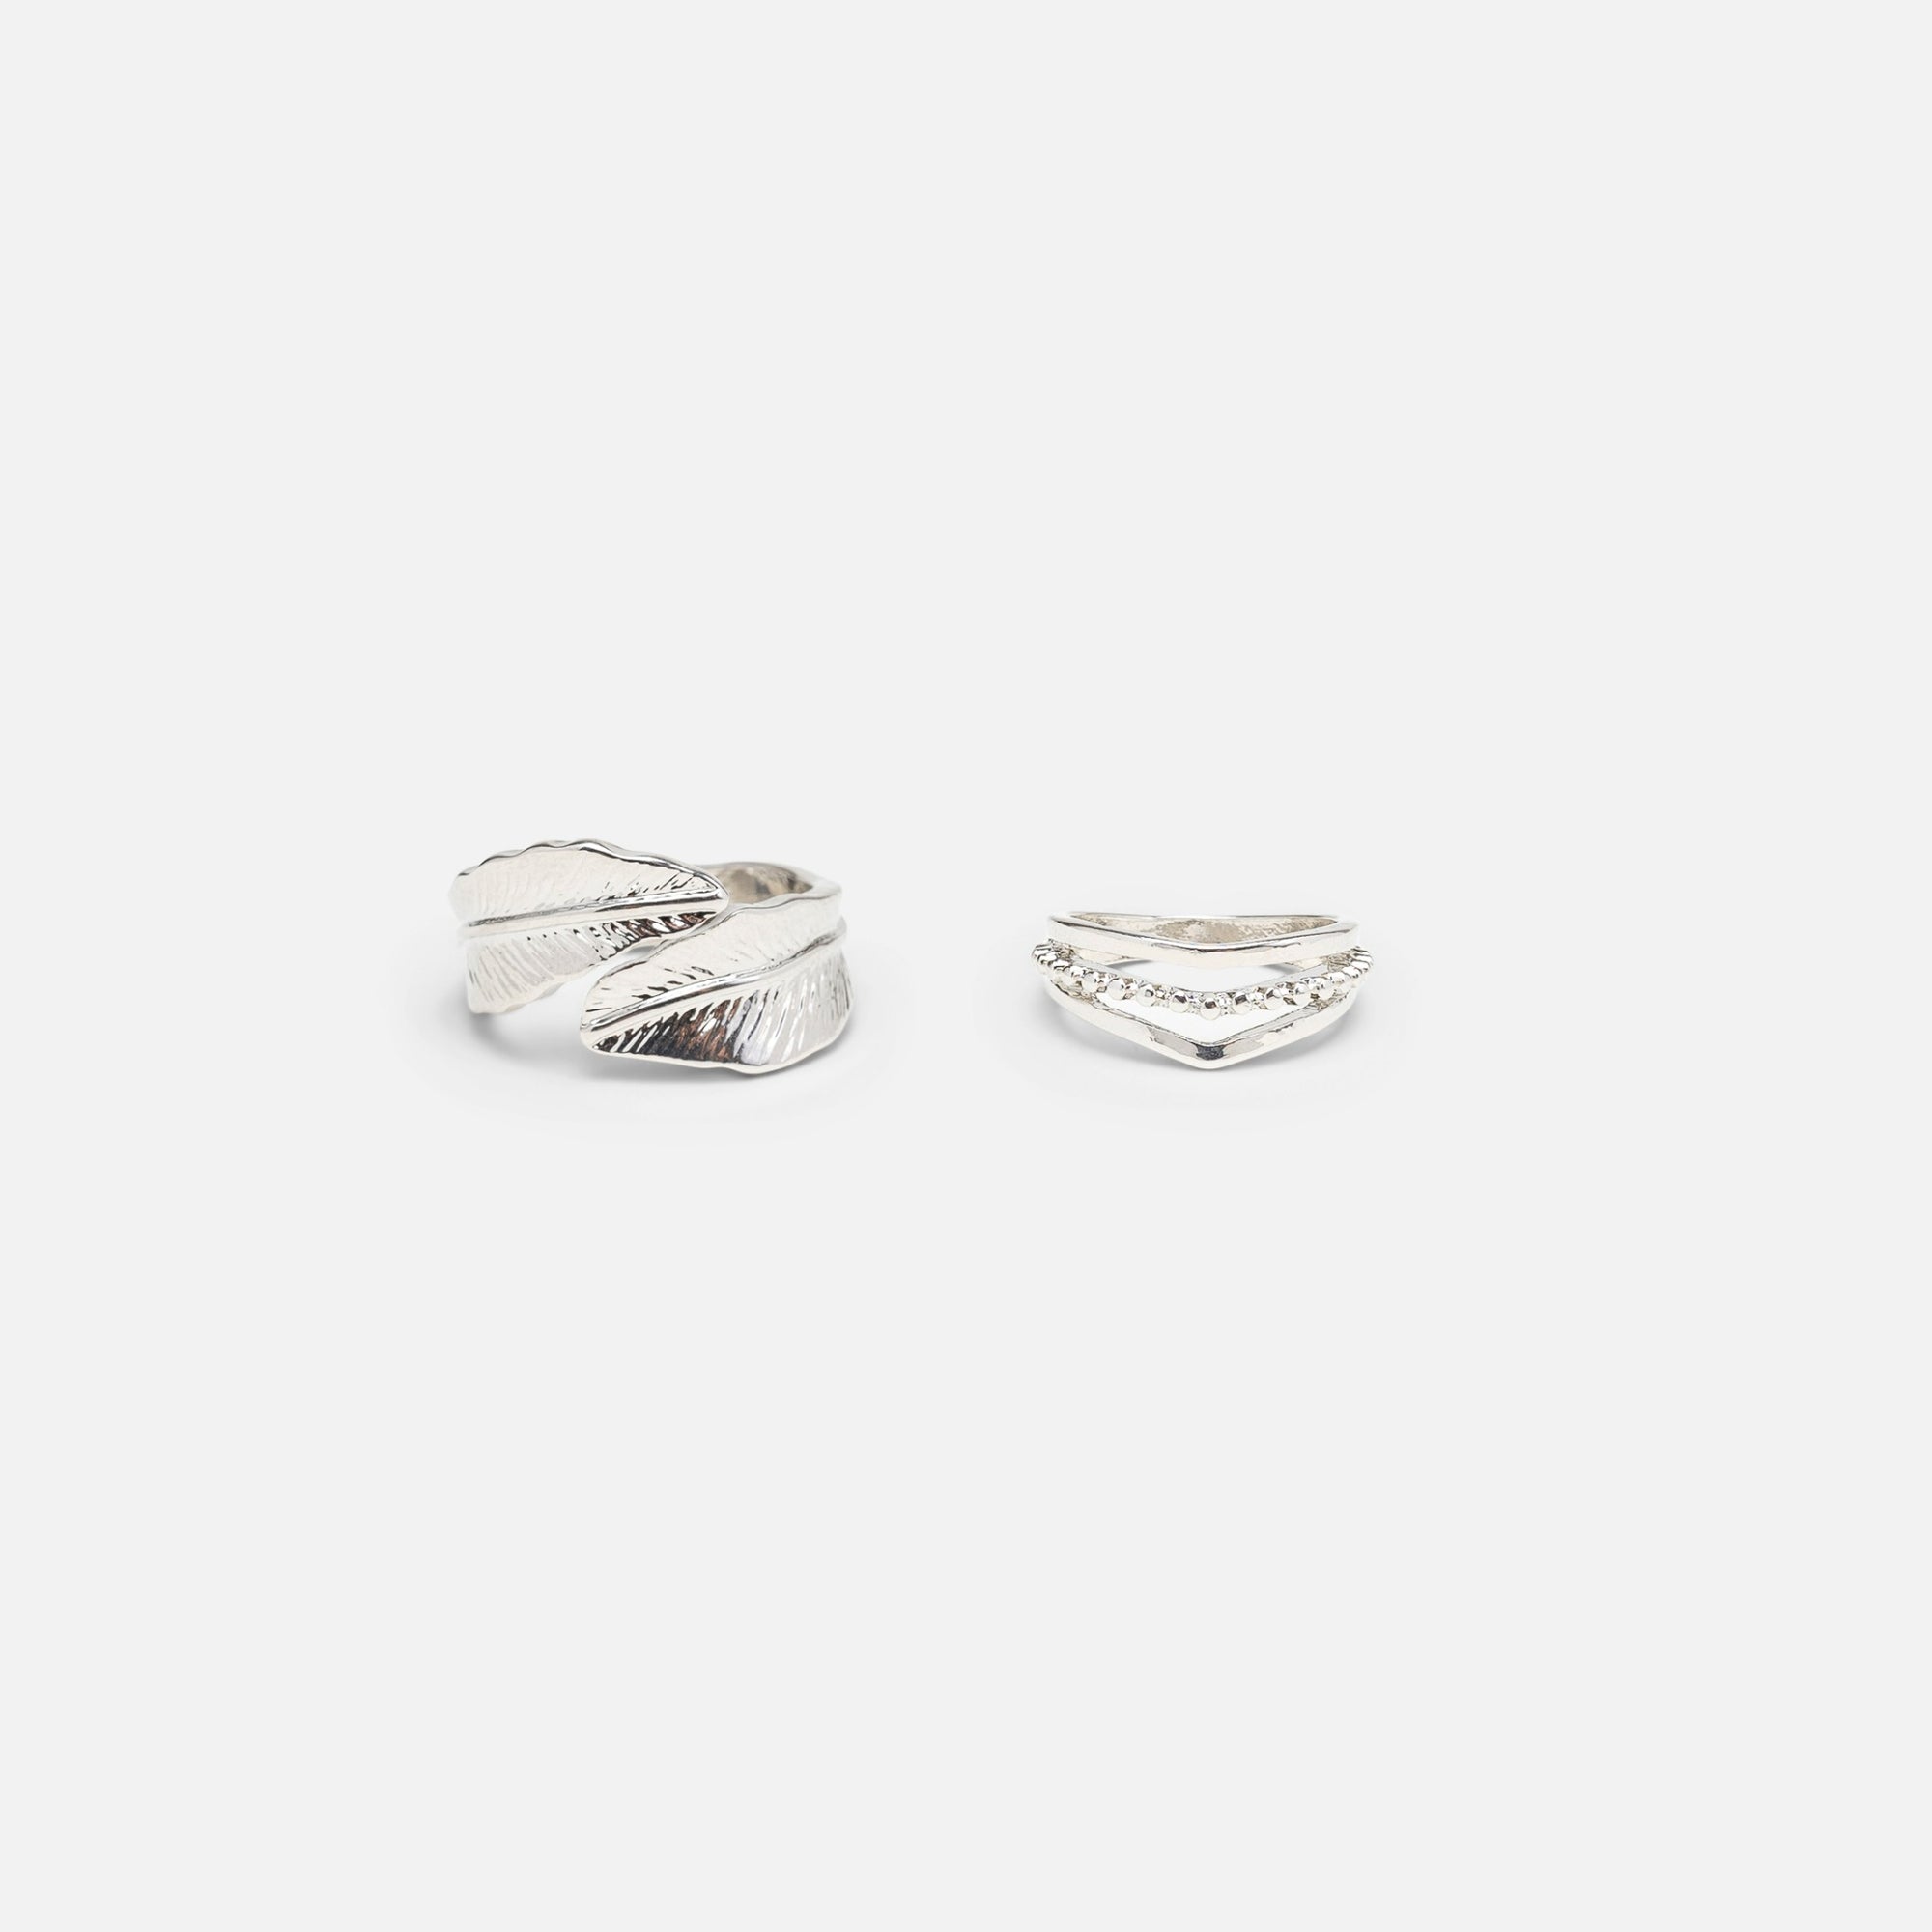 Duo of silver leaf and v shape rings